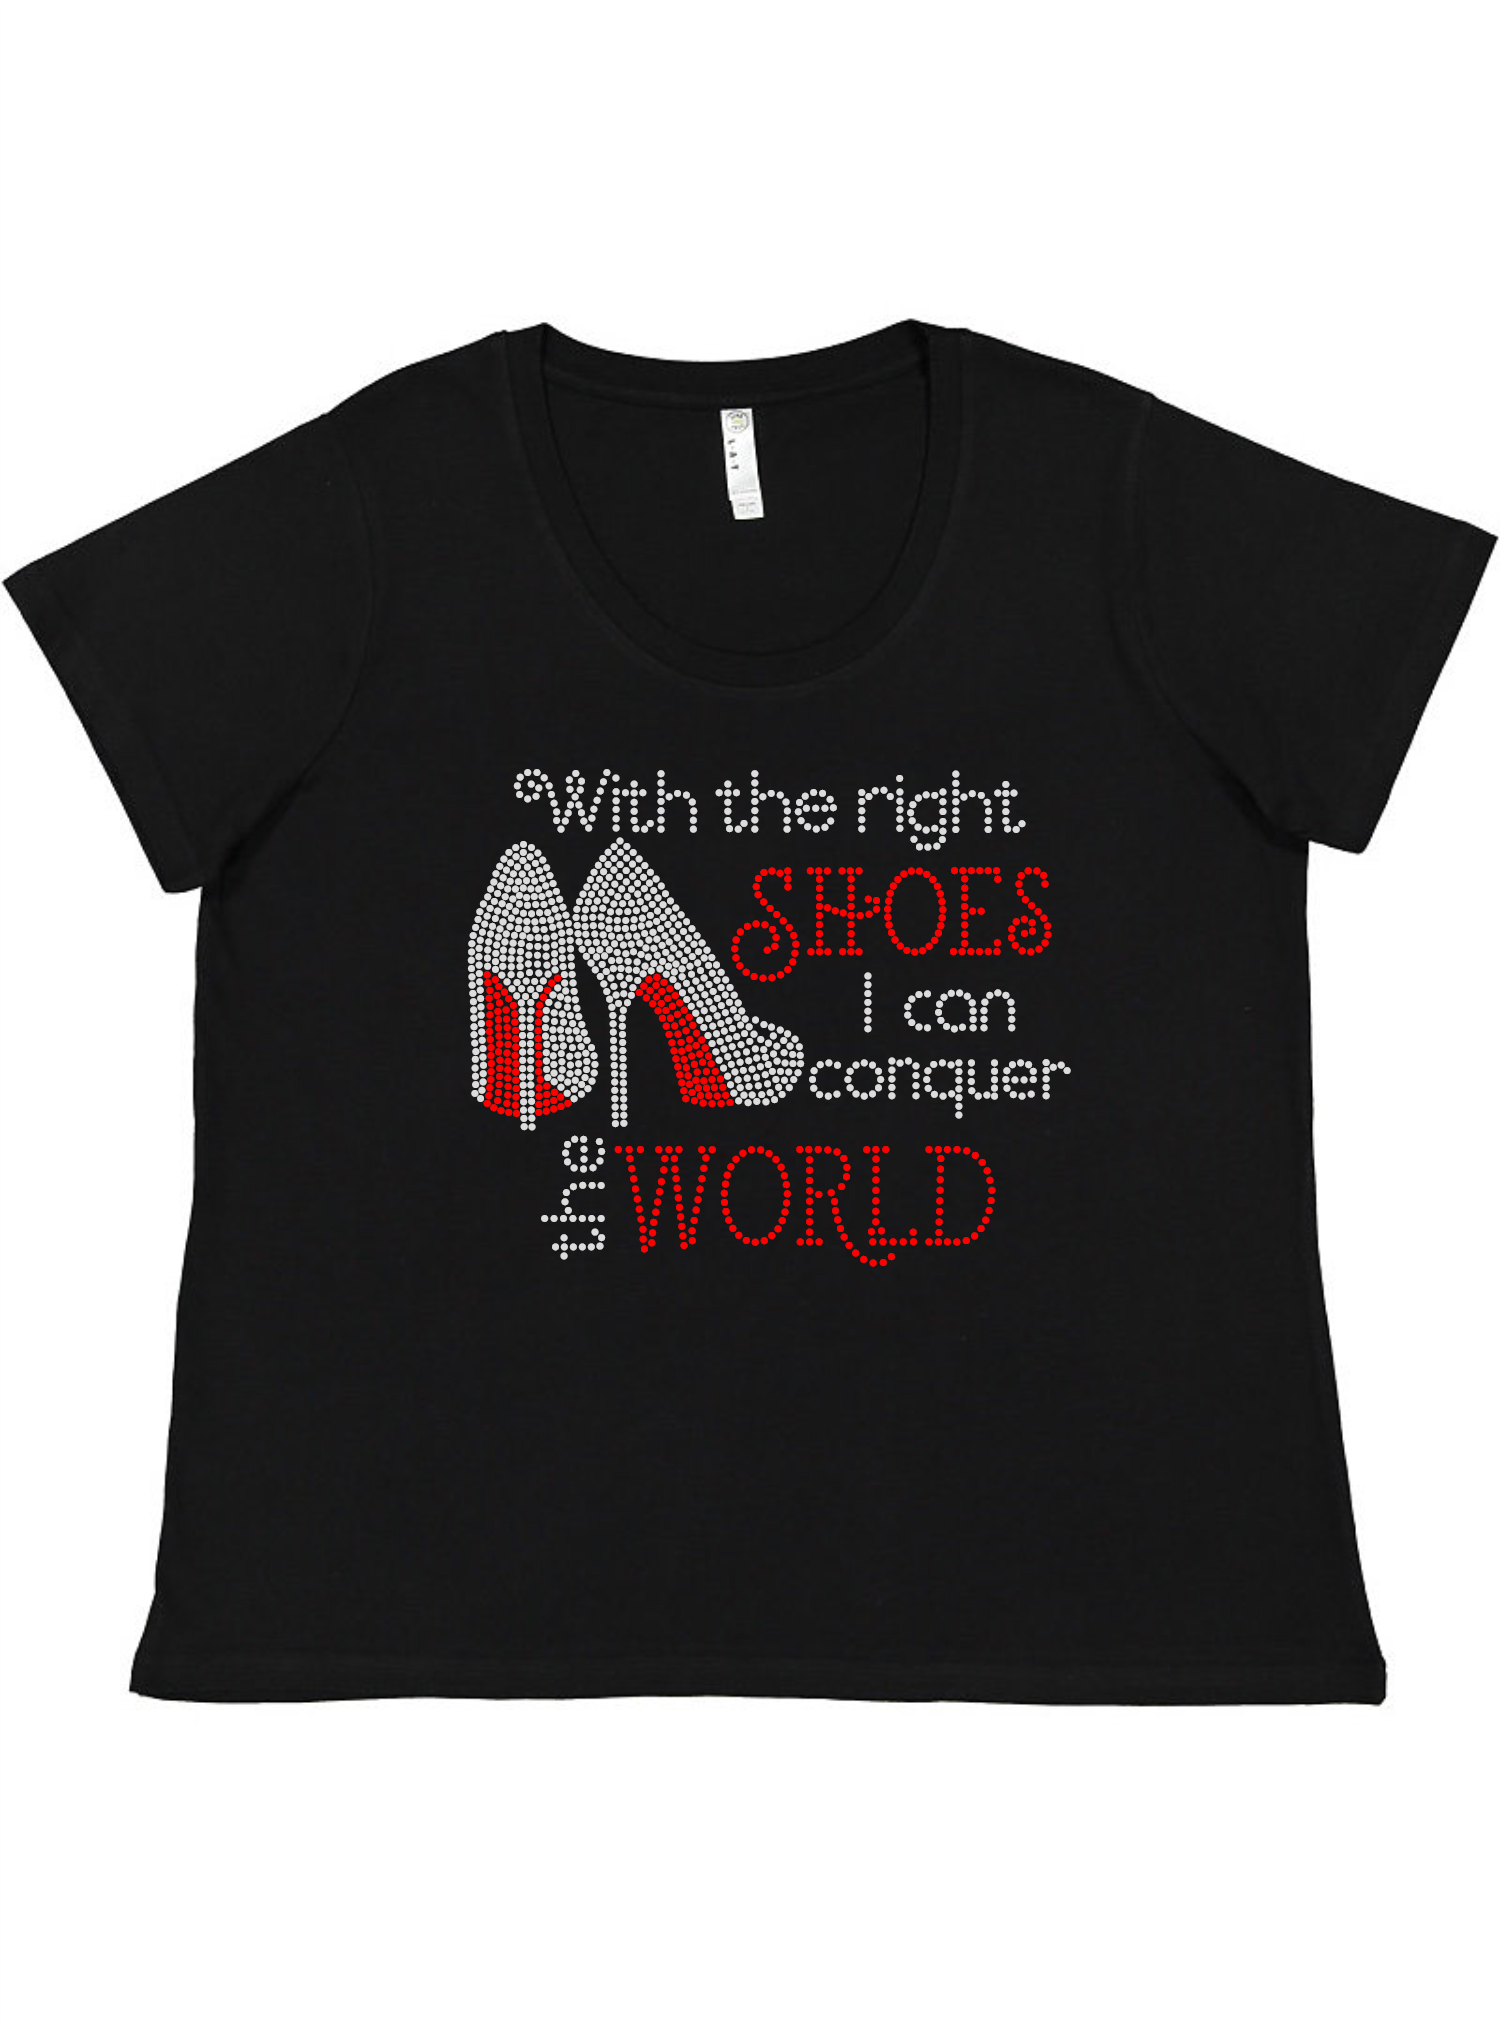 Conquer The World Ladies Tee Ladies Shirt by Akron Pride Custom Tees | Akron Pride Custom Tees